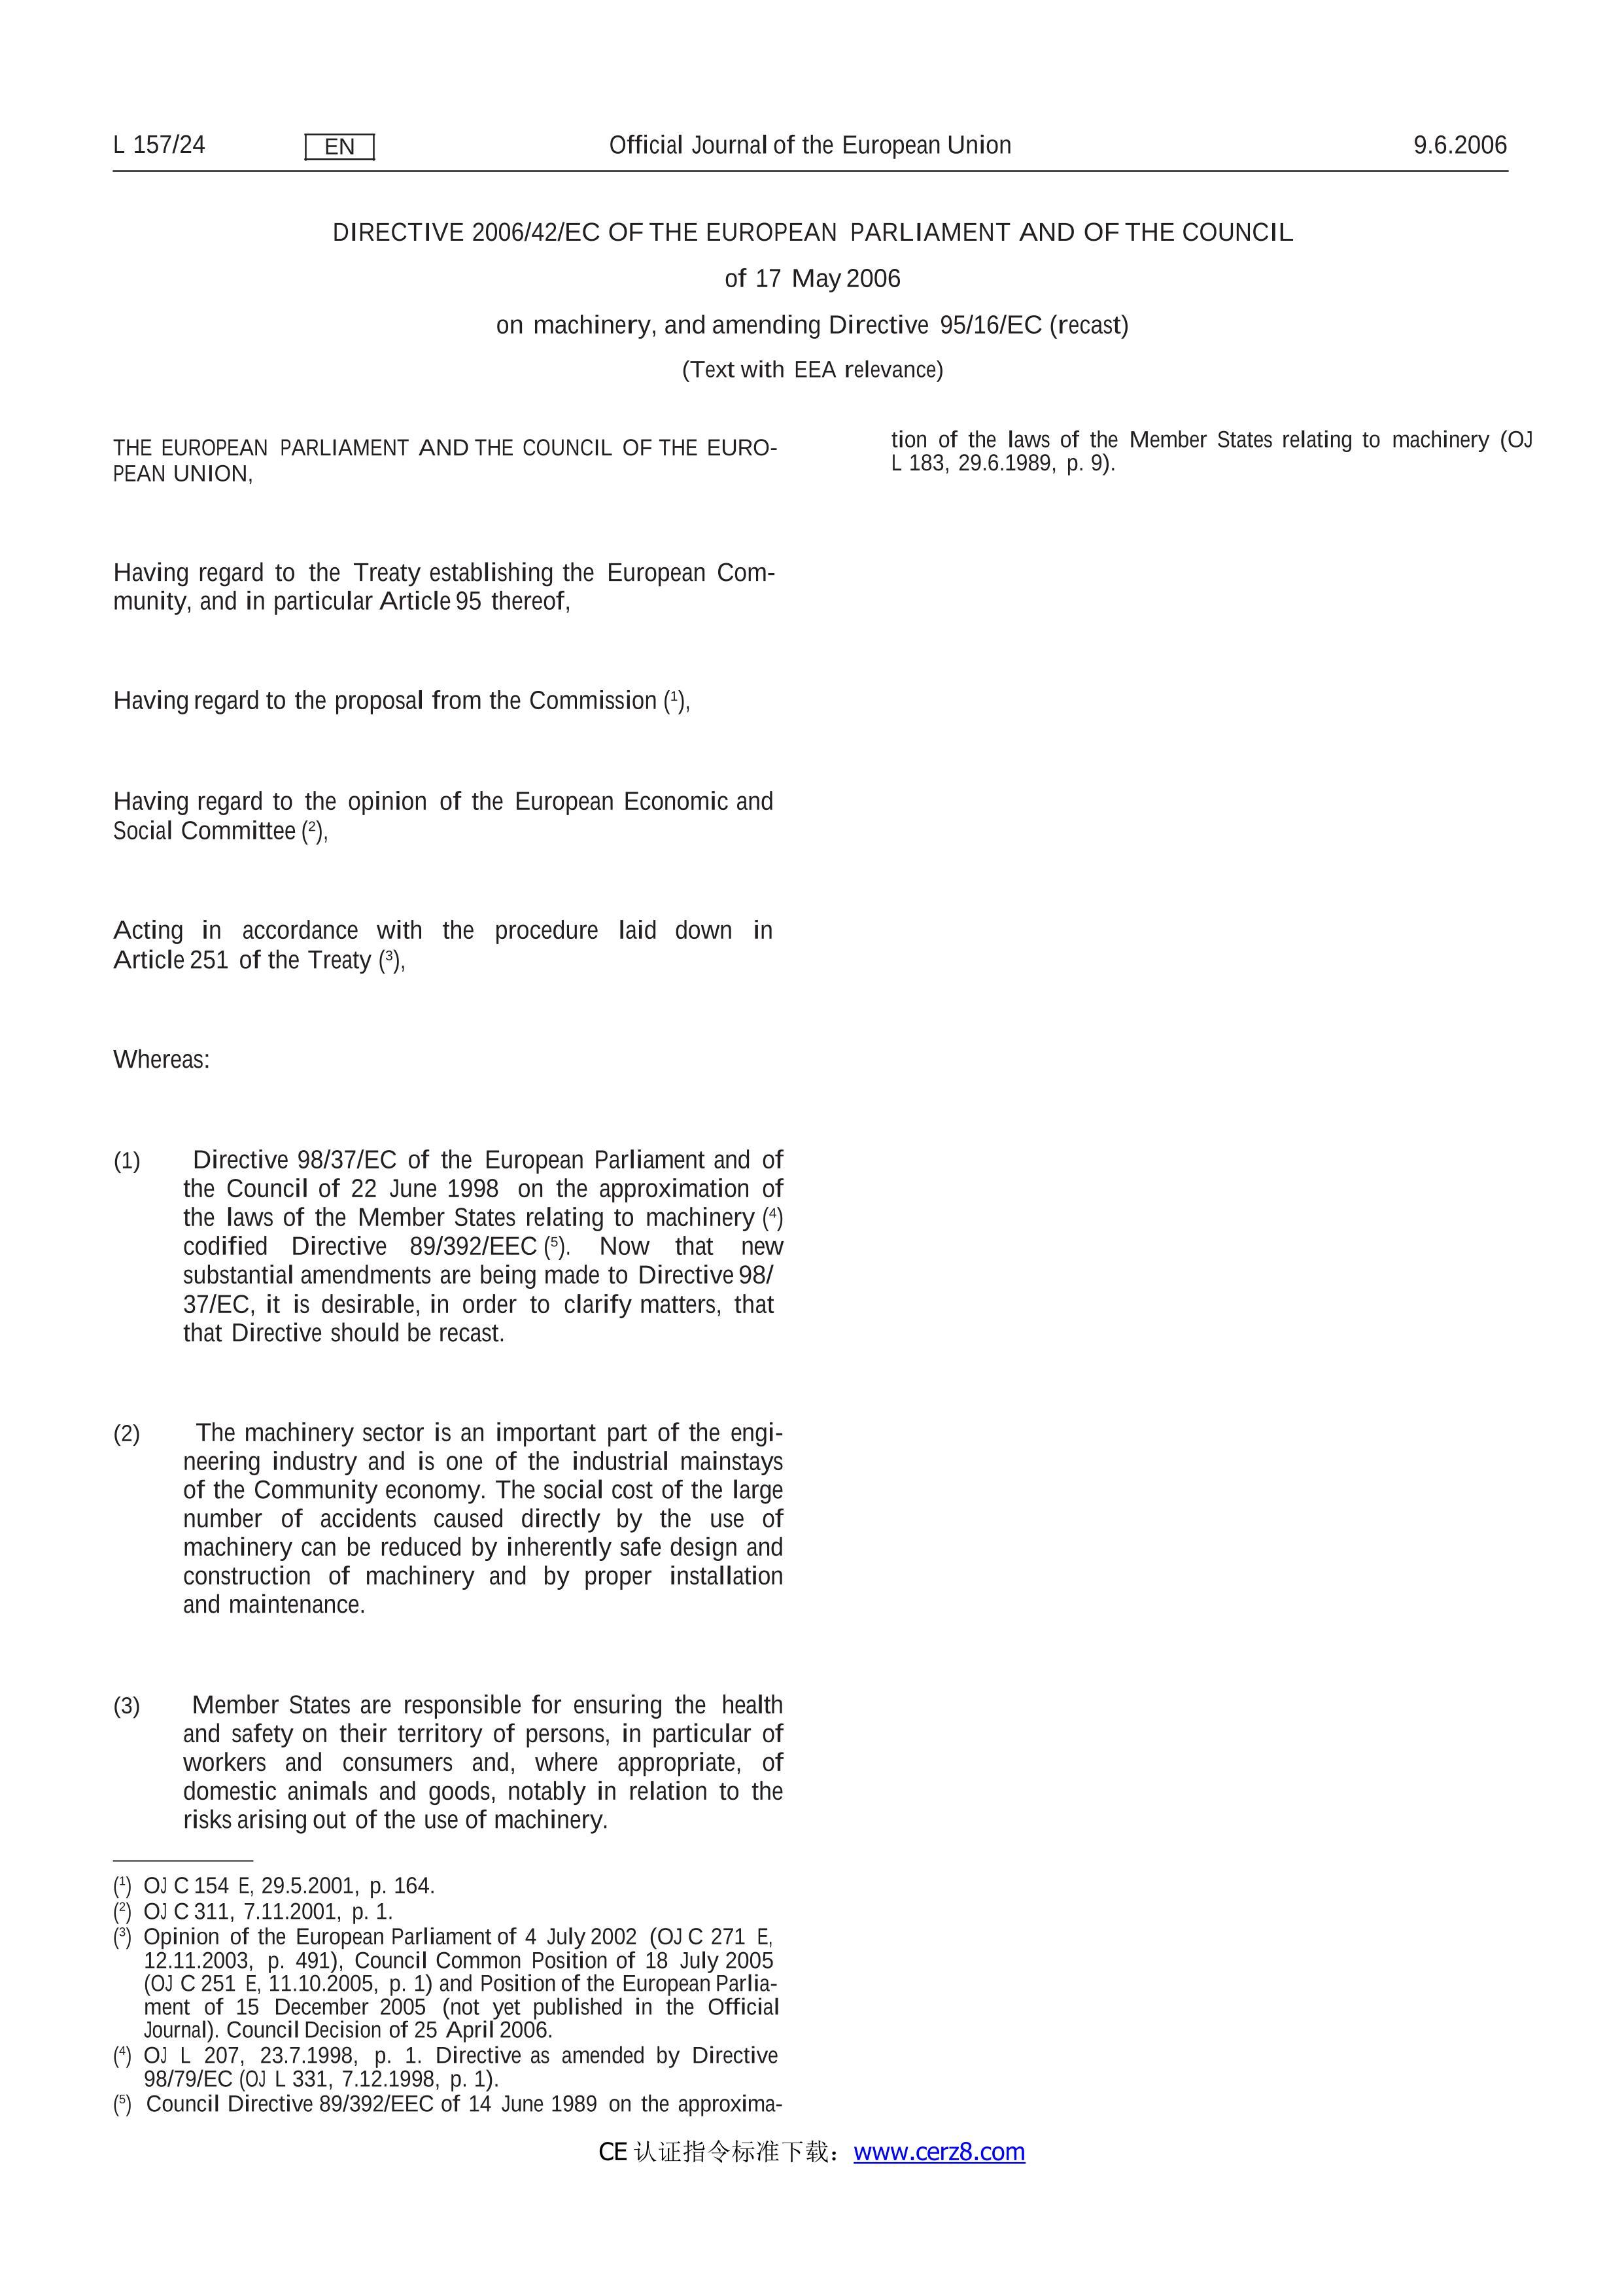 DIRECTIVE 2006M42EC of The EUROPEAN PARLIAMENT and of the COUNCIL of 17 May 2006 on machinery, and amending Directive 95M16MEC (recast).pdf3ҳ